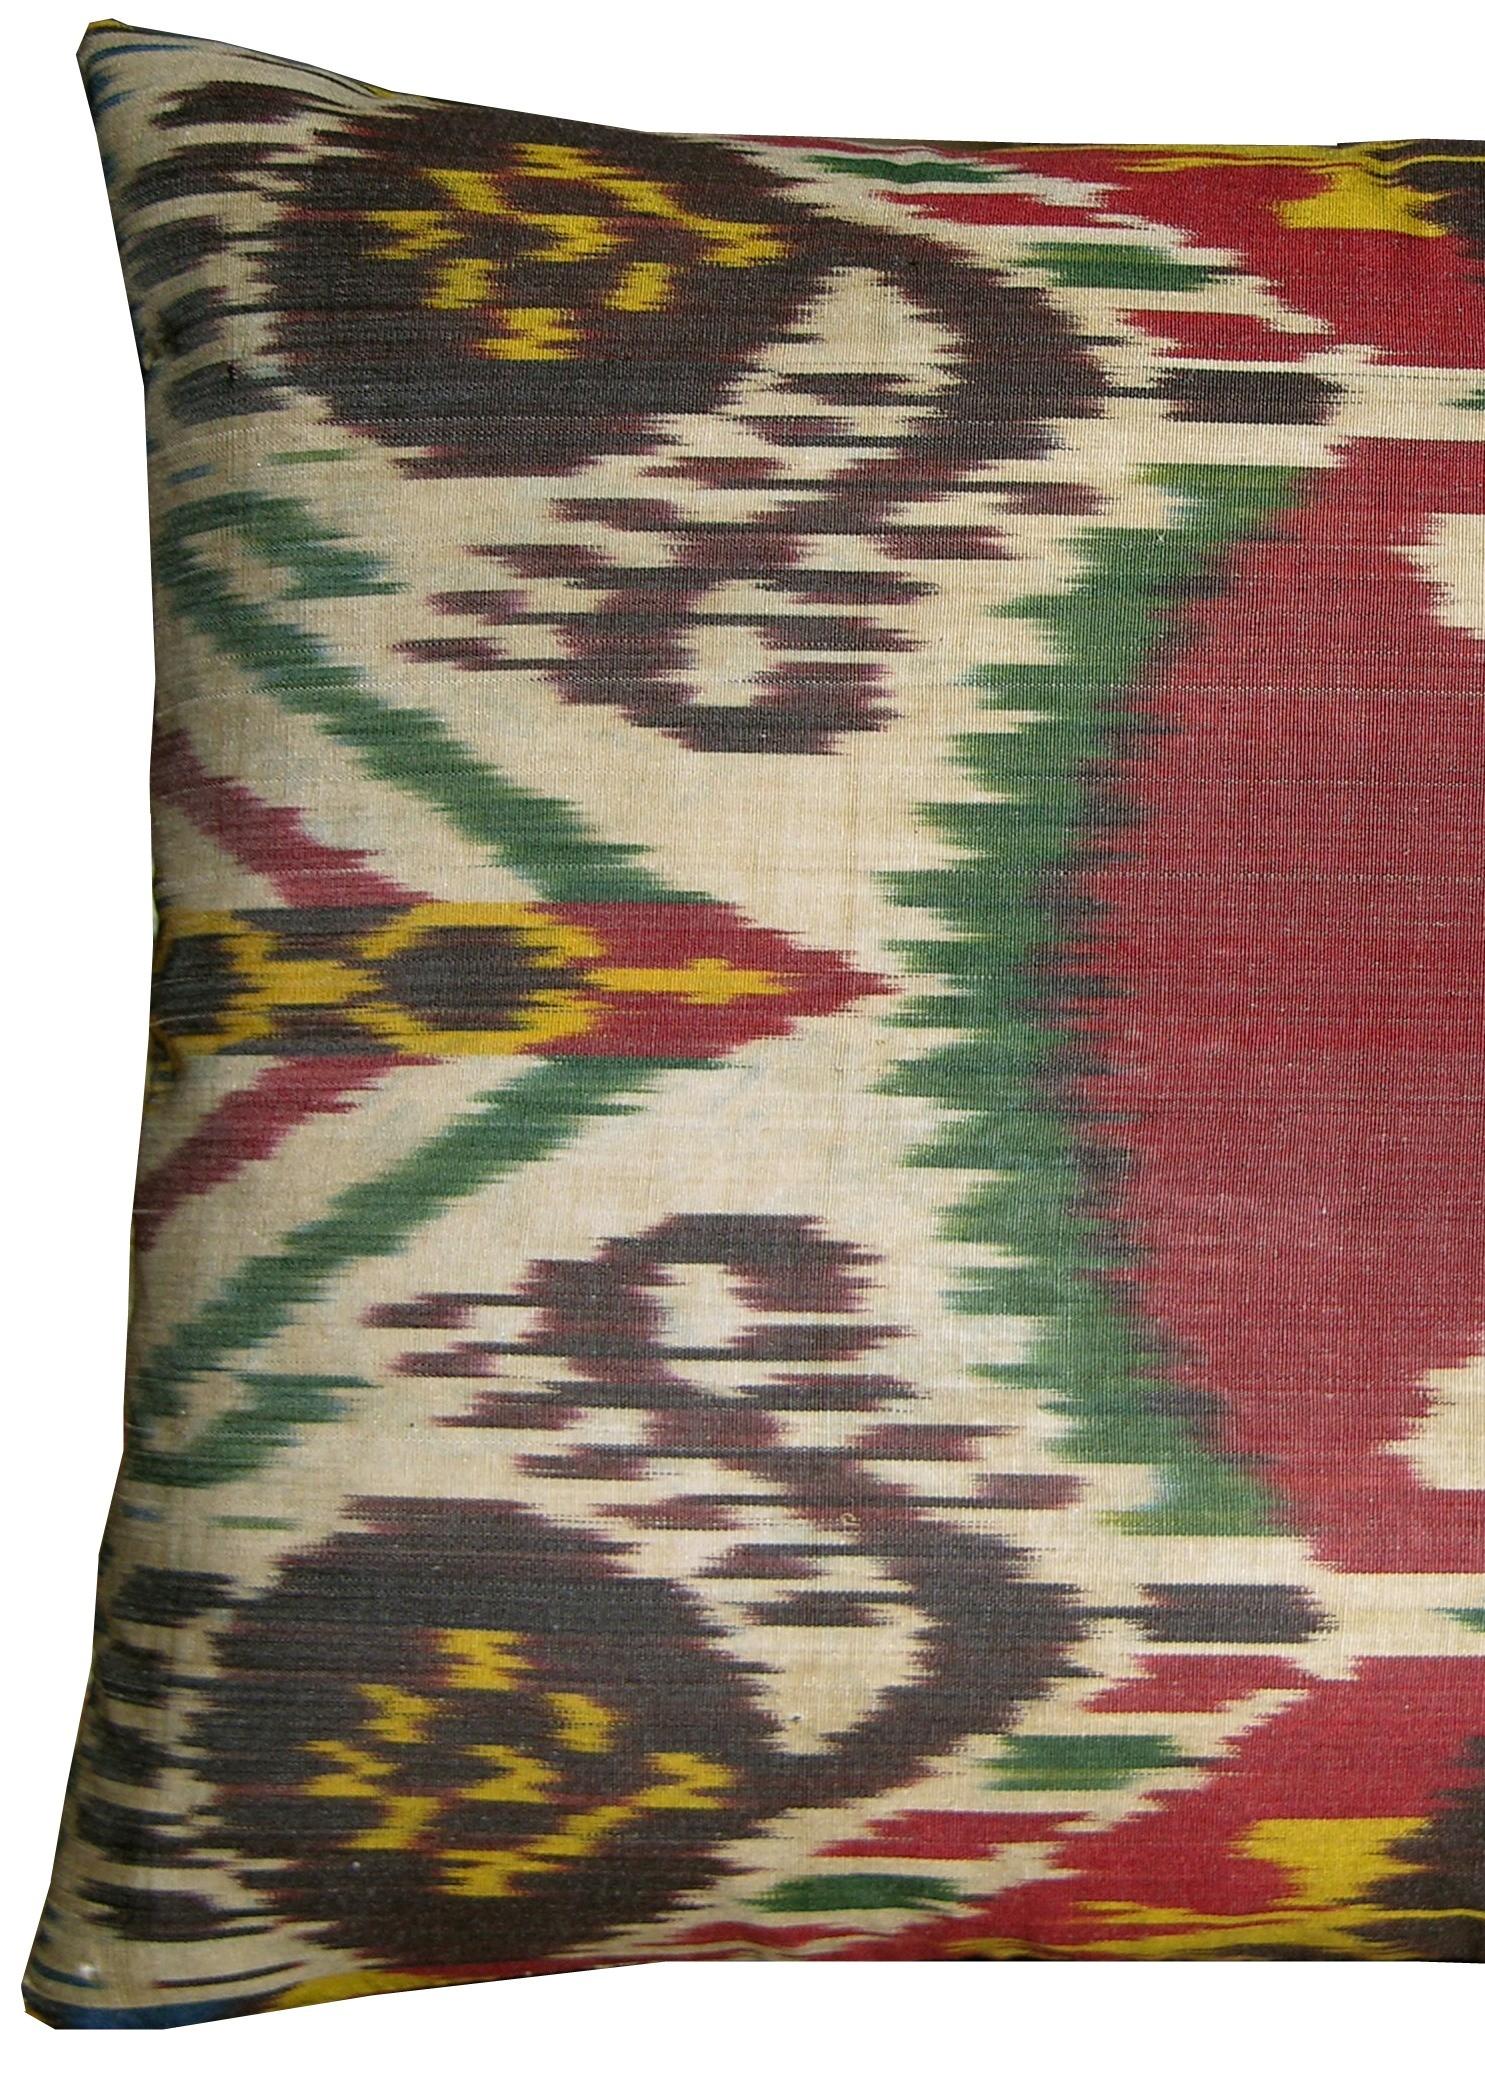 Ca. 1900 Antique Ikat Tapestry Pillow